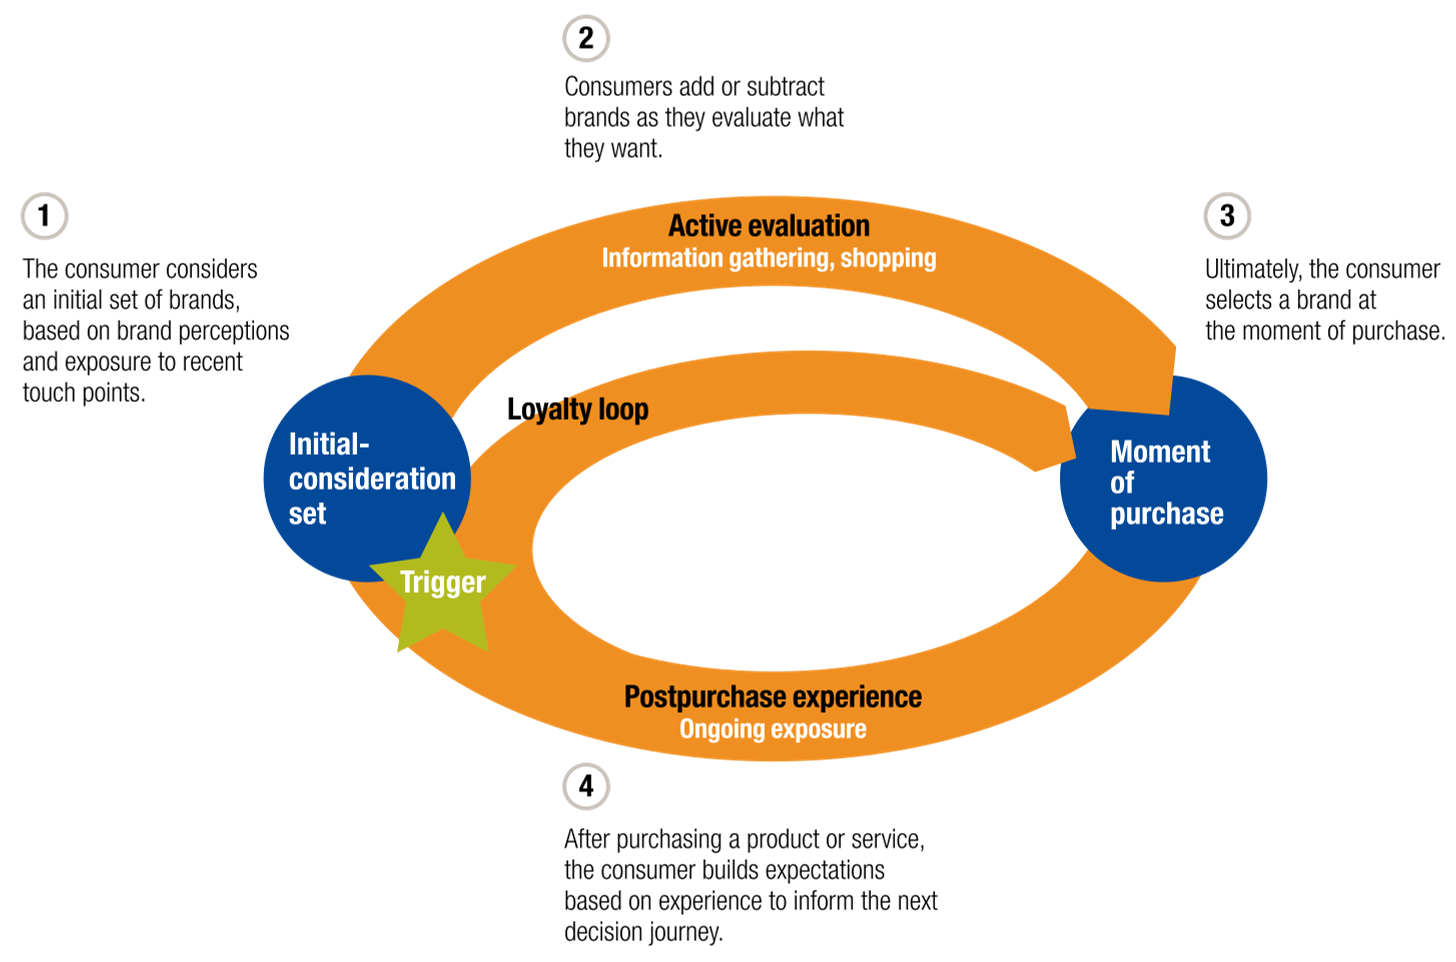 The decision-making process is now a circular journey with four phases: initial consideration; active evaluation, or the process of researching potential purchases; closure, when consumers buy brands; and postpurchase, when consumers experience them.